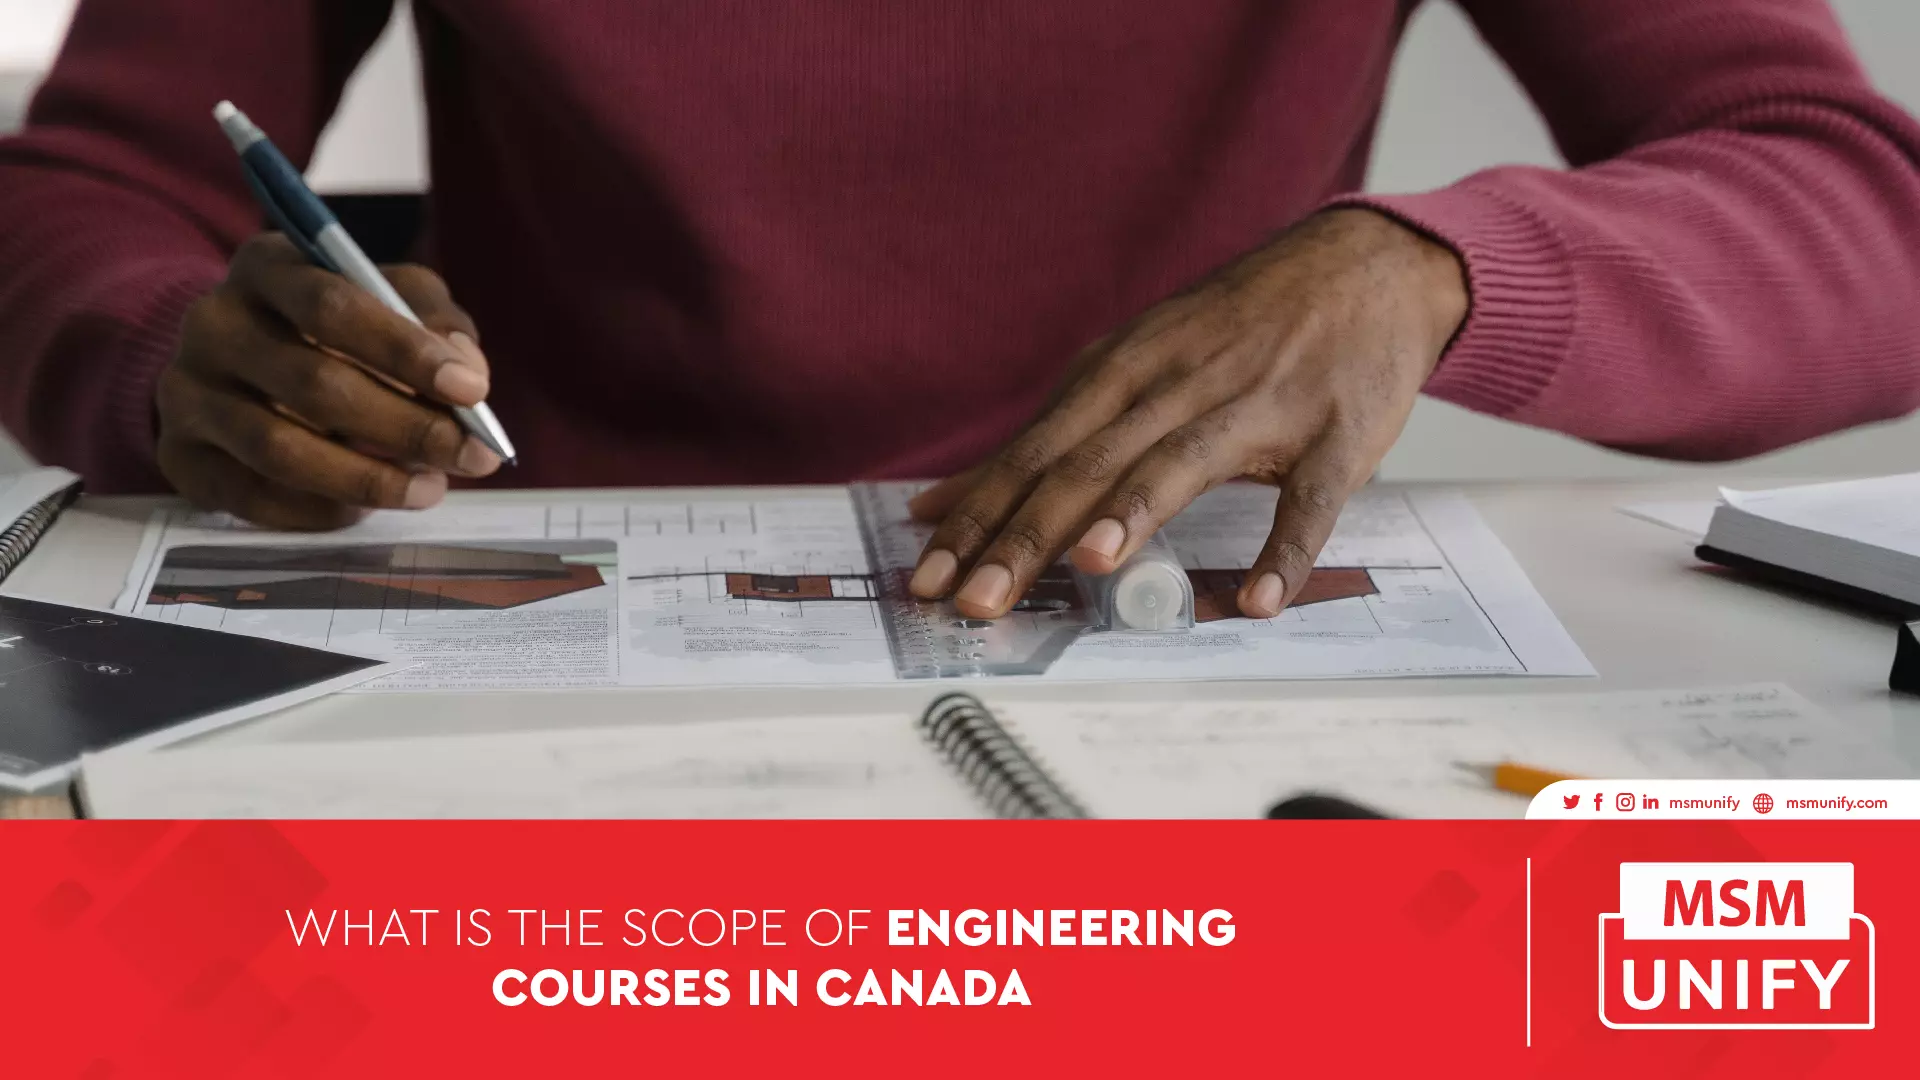 110822 MSM Unify What is the Scope of Engineering Courses in Canada 01